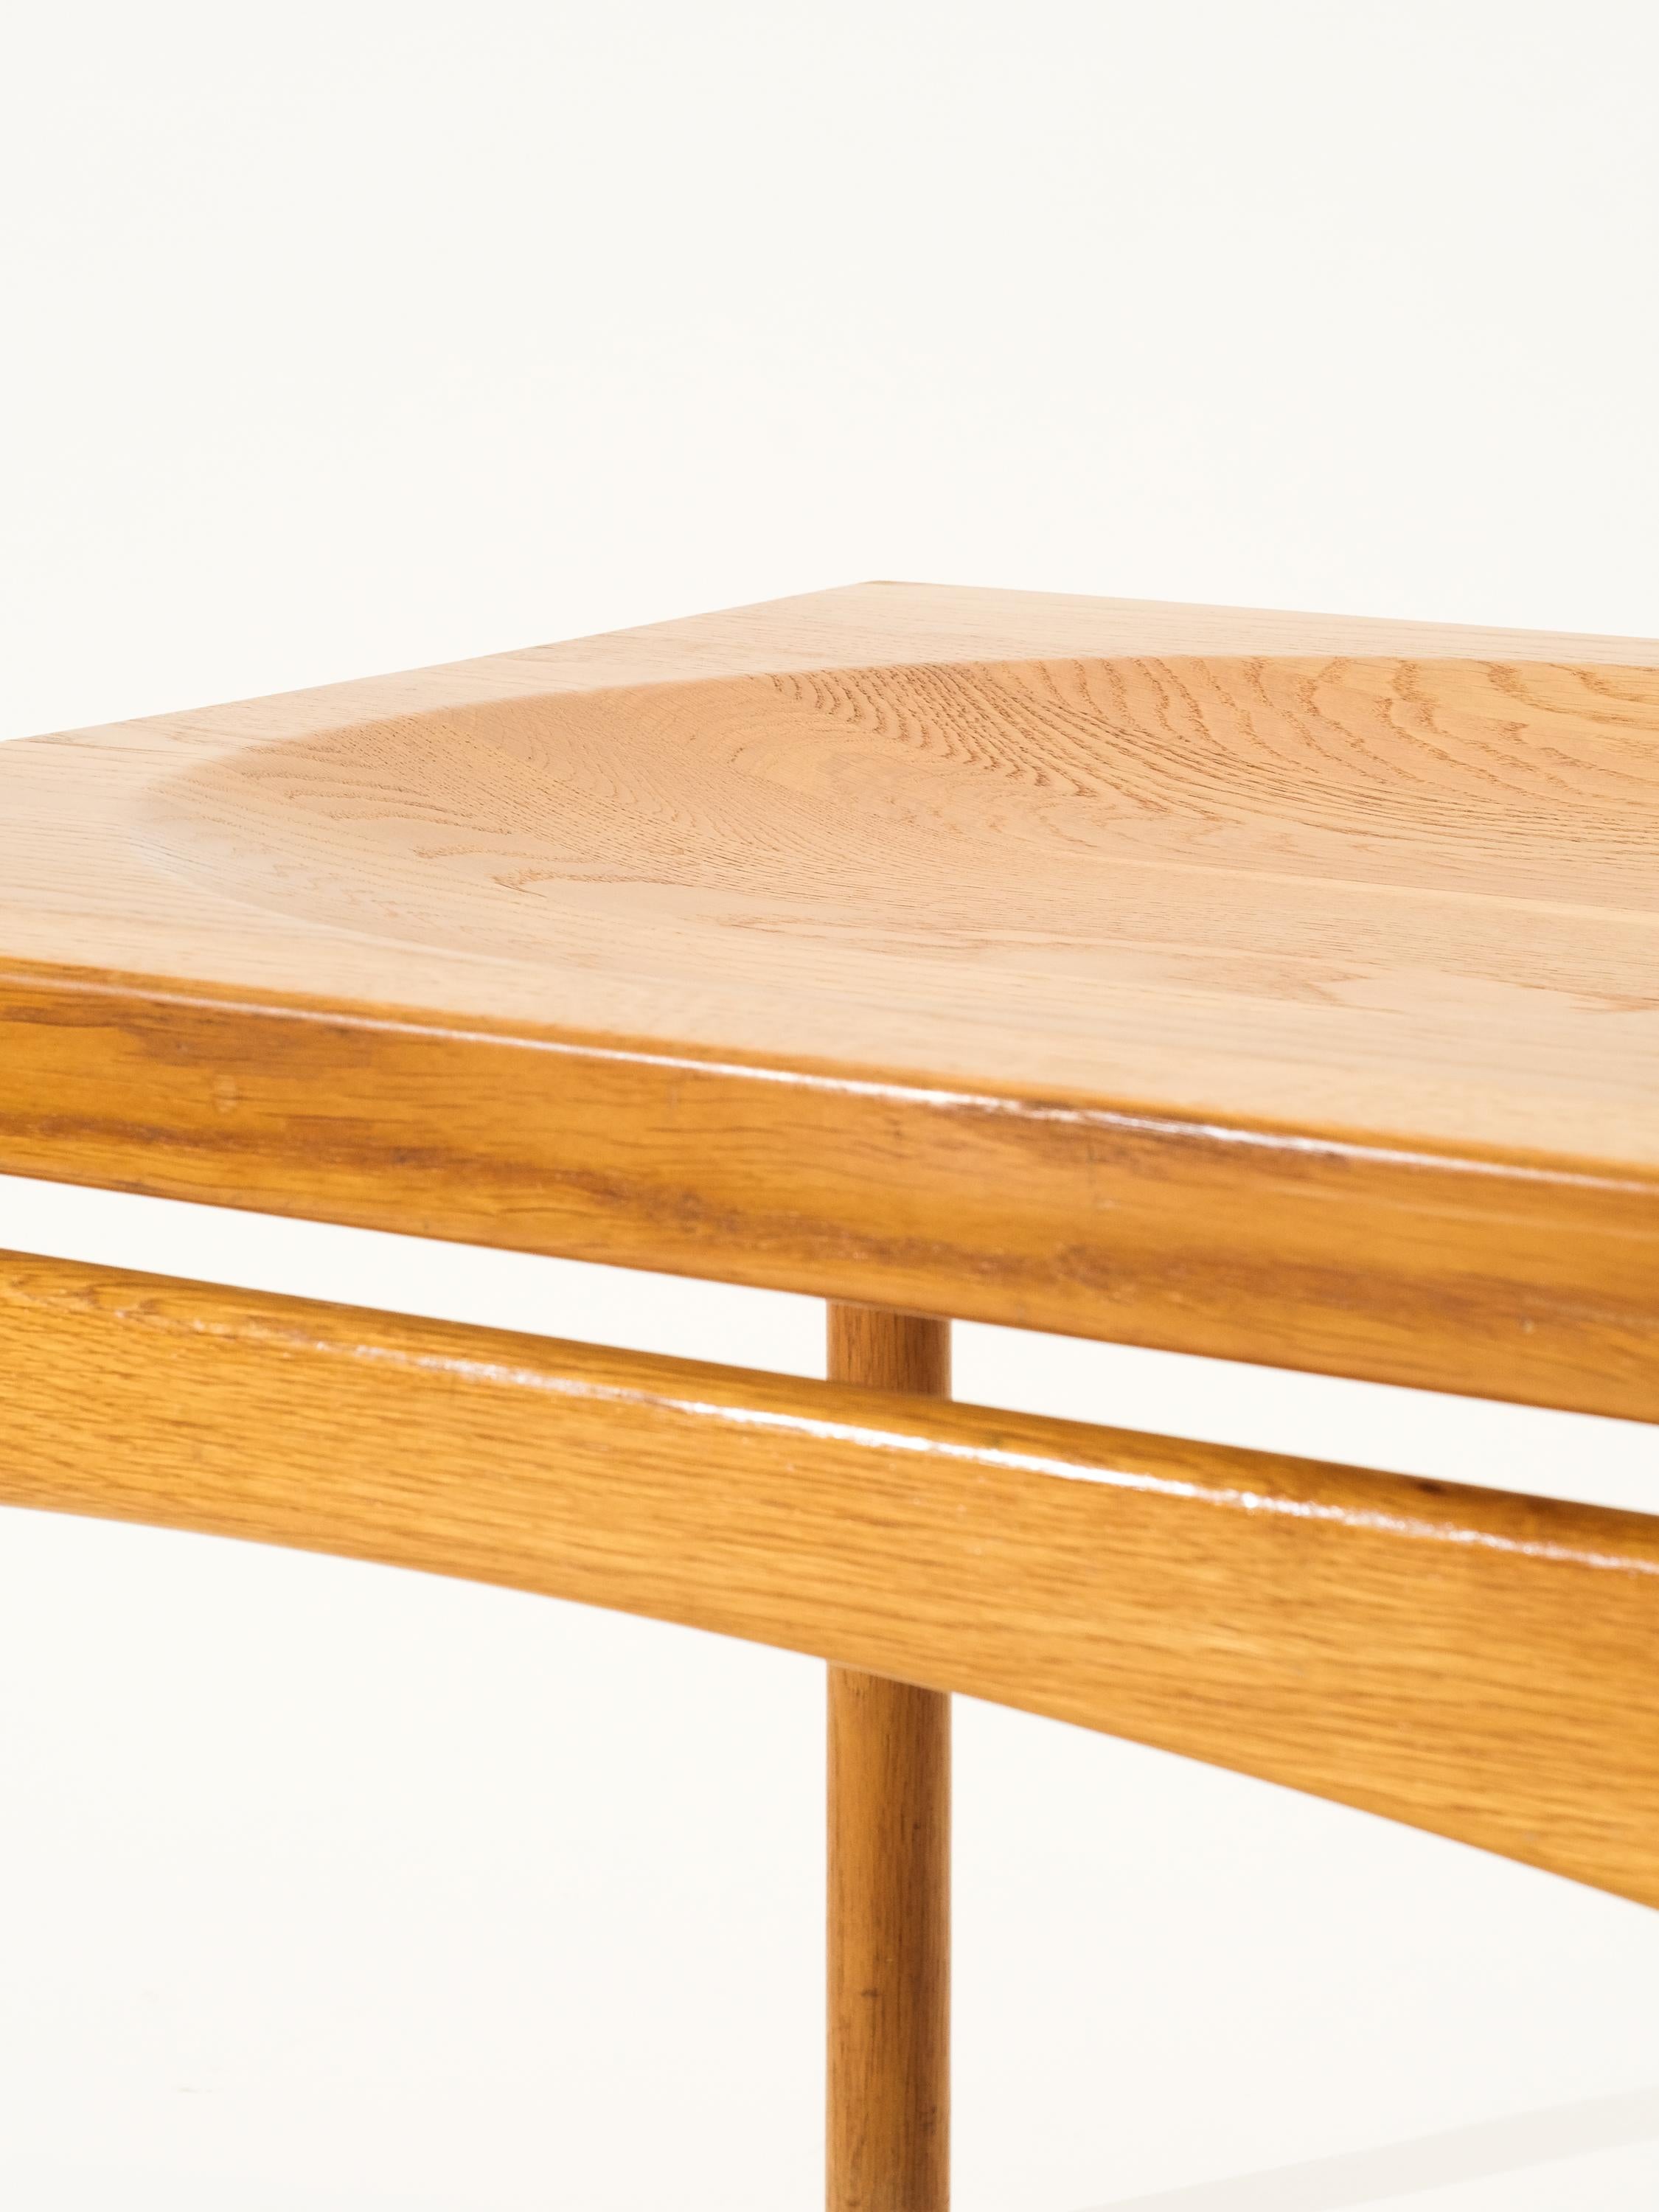 Solid Oak Coffee/Tray Table by Gunnar Myrstrand for Källemo, Sweden, 1960s For Sale 1